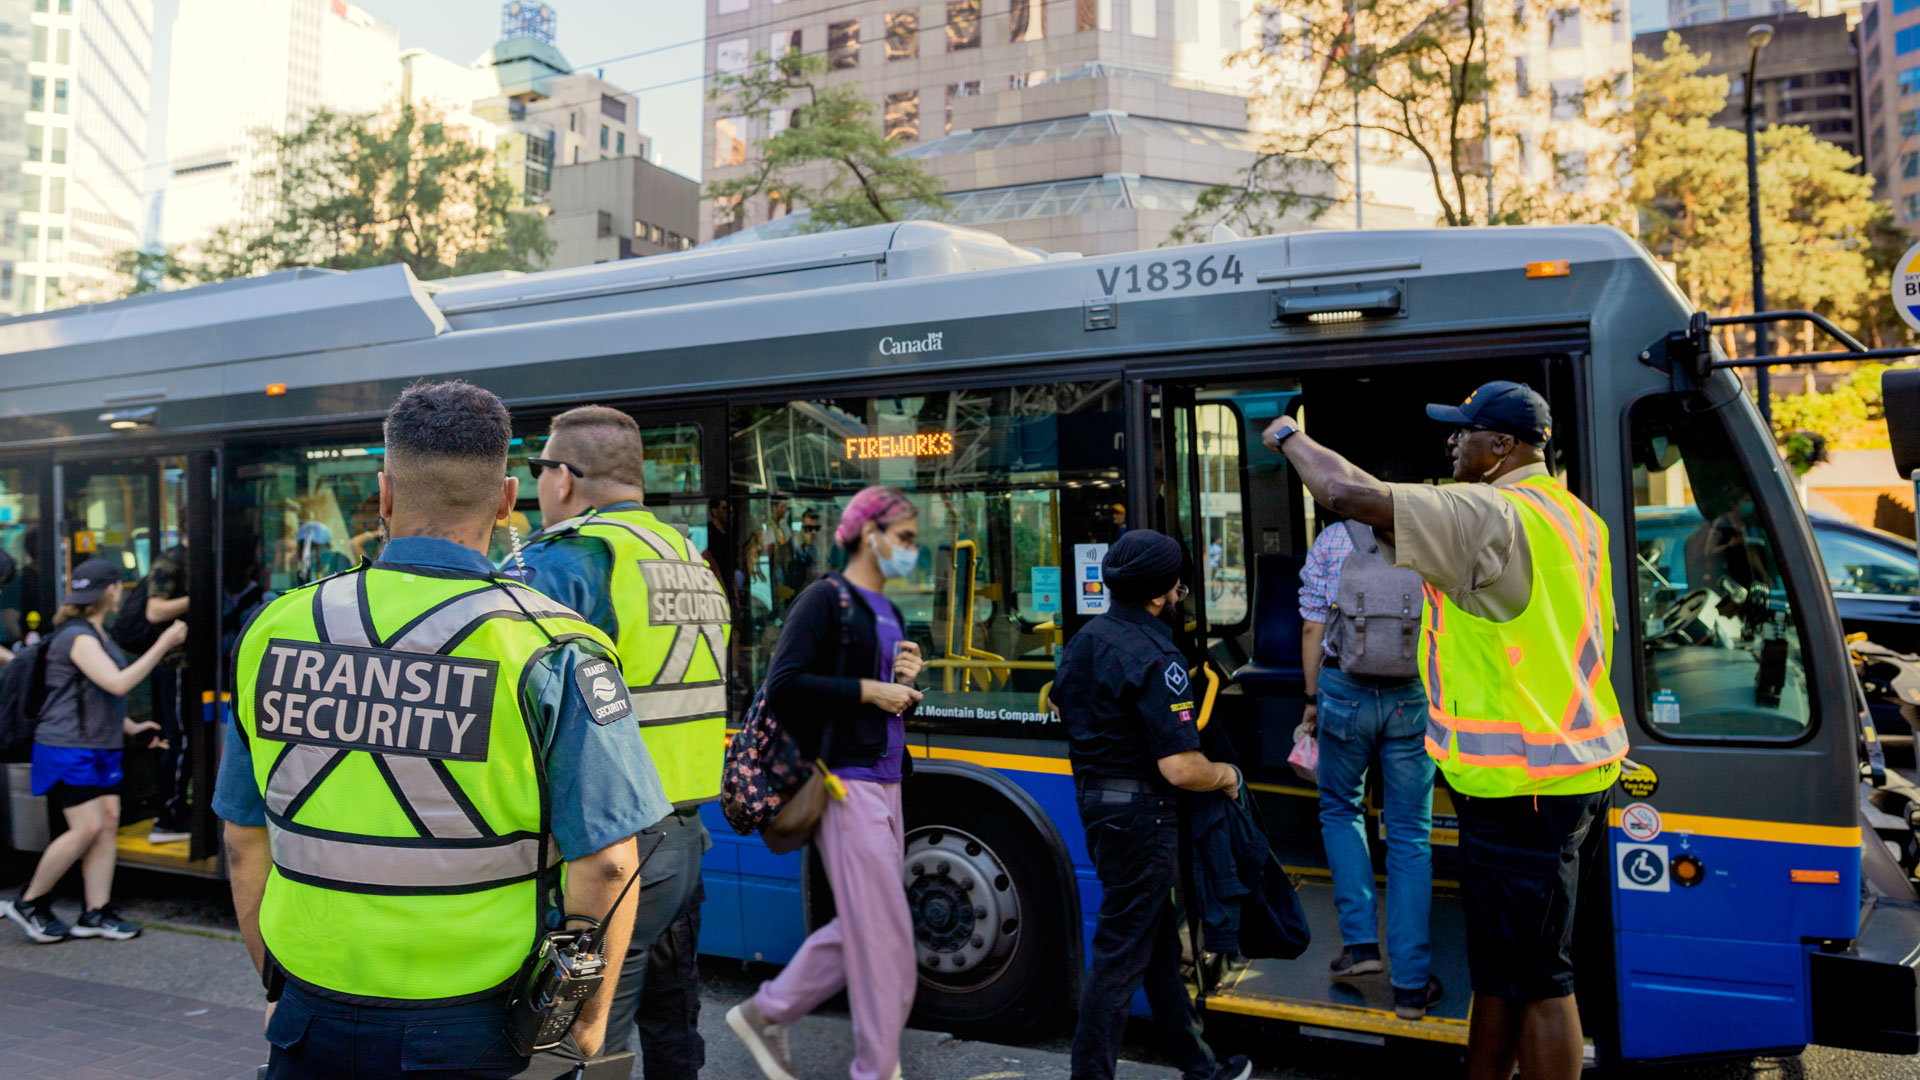 Transit employees wearing high-vis vests direct people aboard a bus that reads "Fireworks"